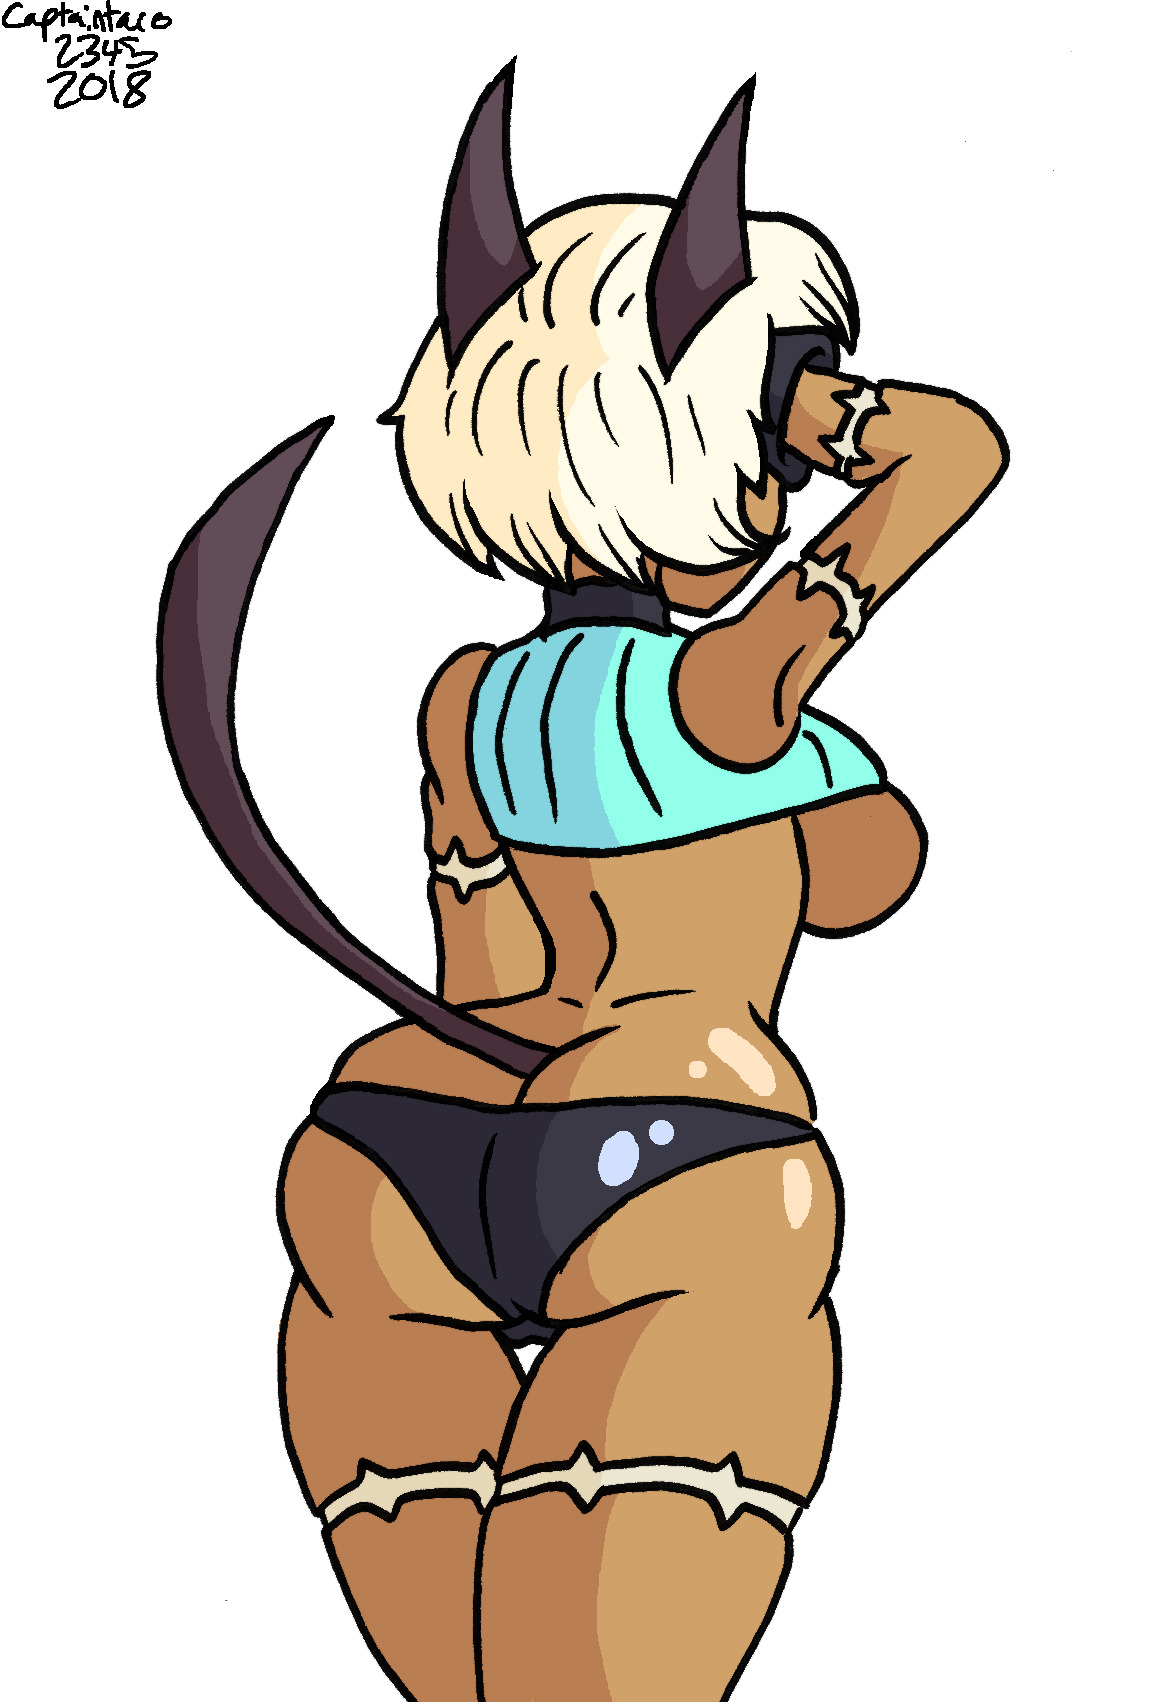 Ms. Fortune showing off her butt. I wanna do more Skullgirls stuff in the future,